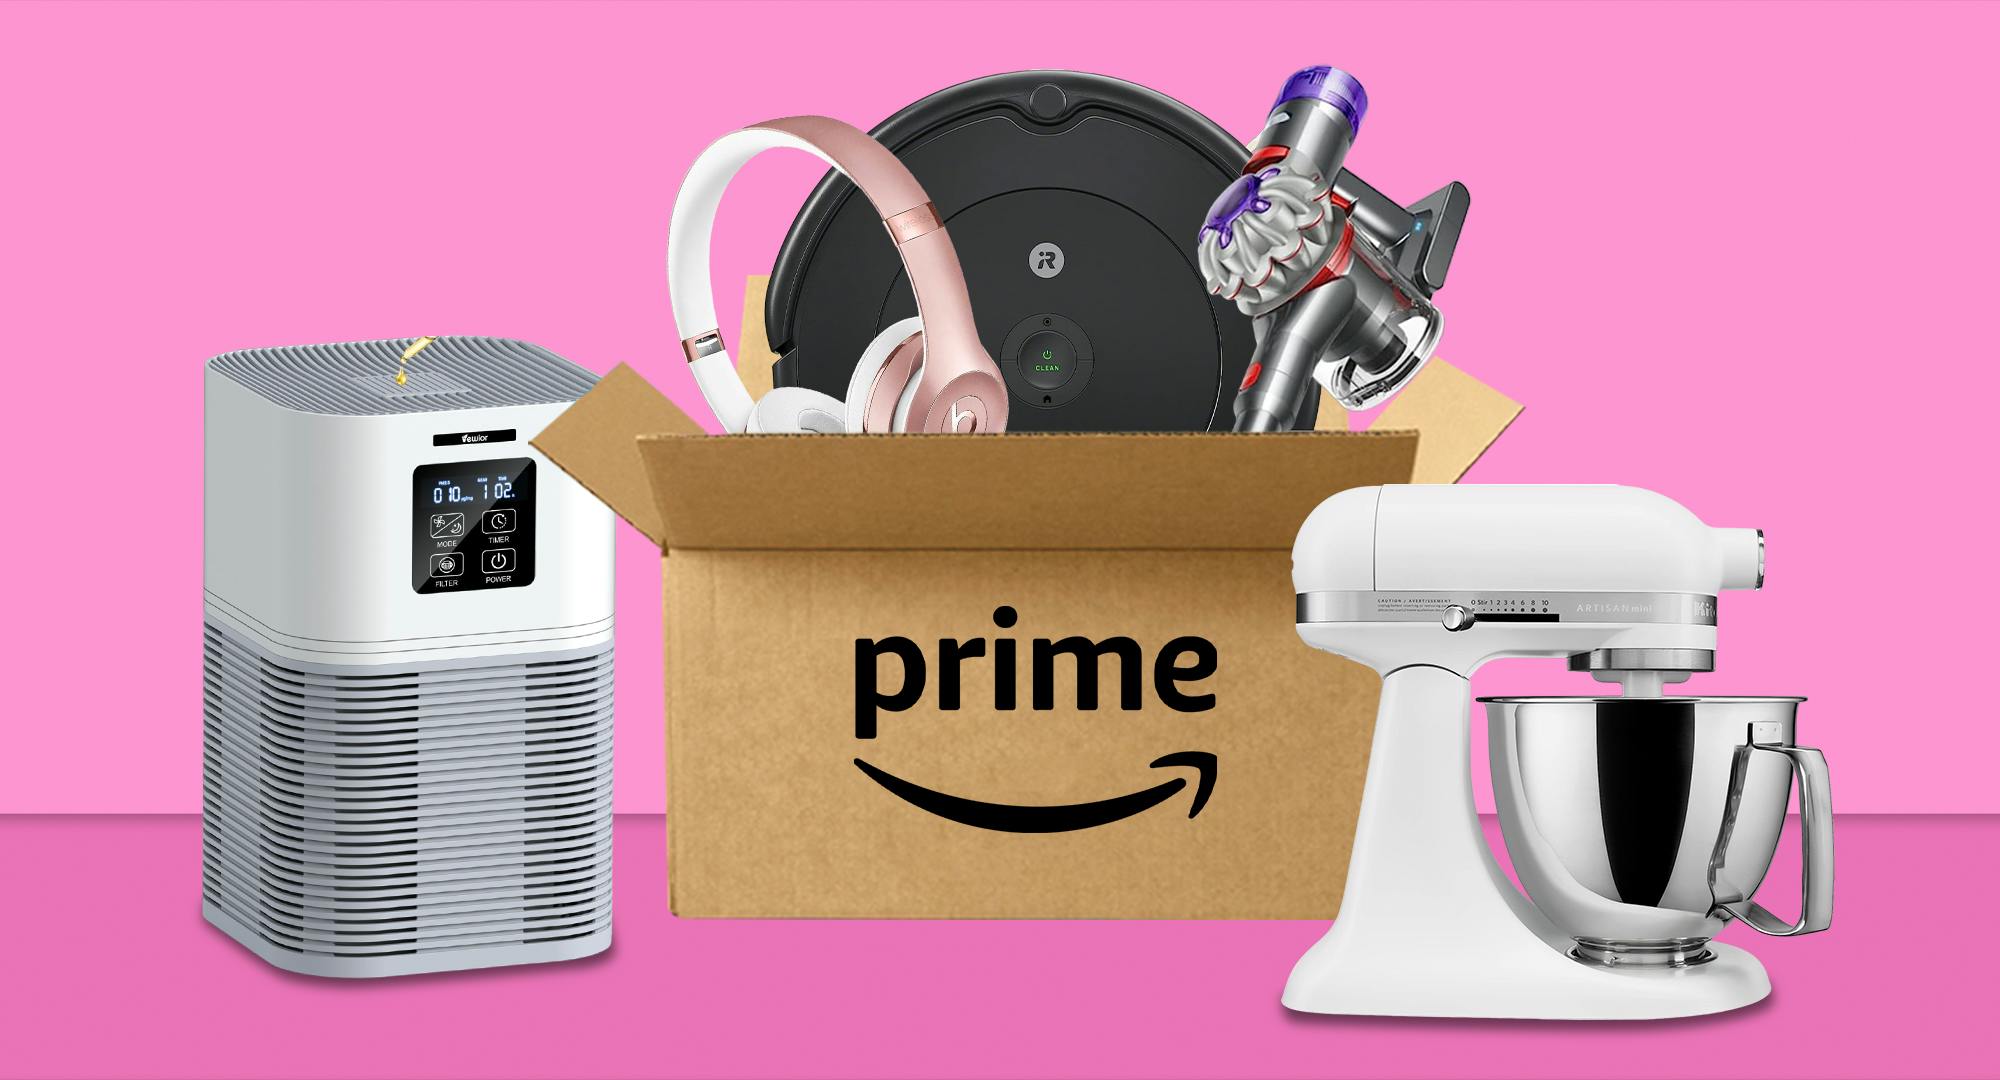 https://content-images.thekrazycouponlady.com/nie44ndm9bqr/3OBuuAAlcDzWkwrMGmGJYT/45e84a671ed47b6ef7b4ca49525af61a/featured-image-prime-day-box-12-1697126899-1697126900.png